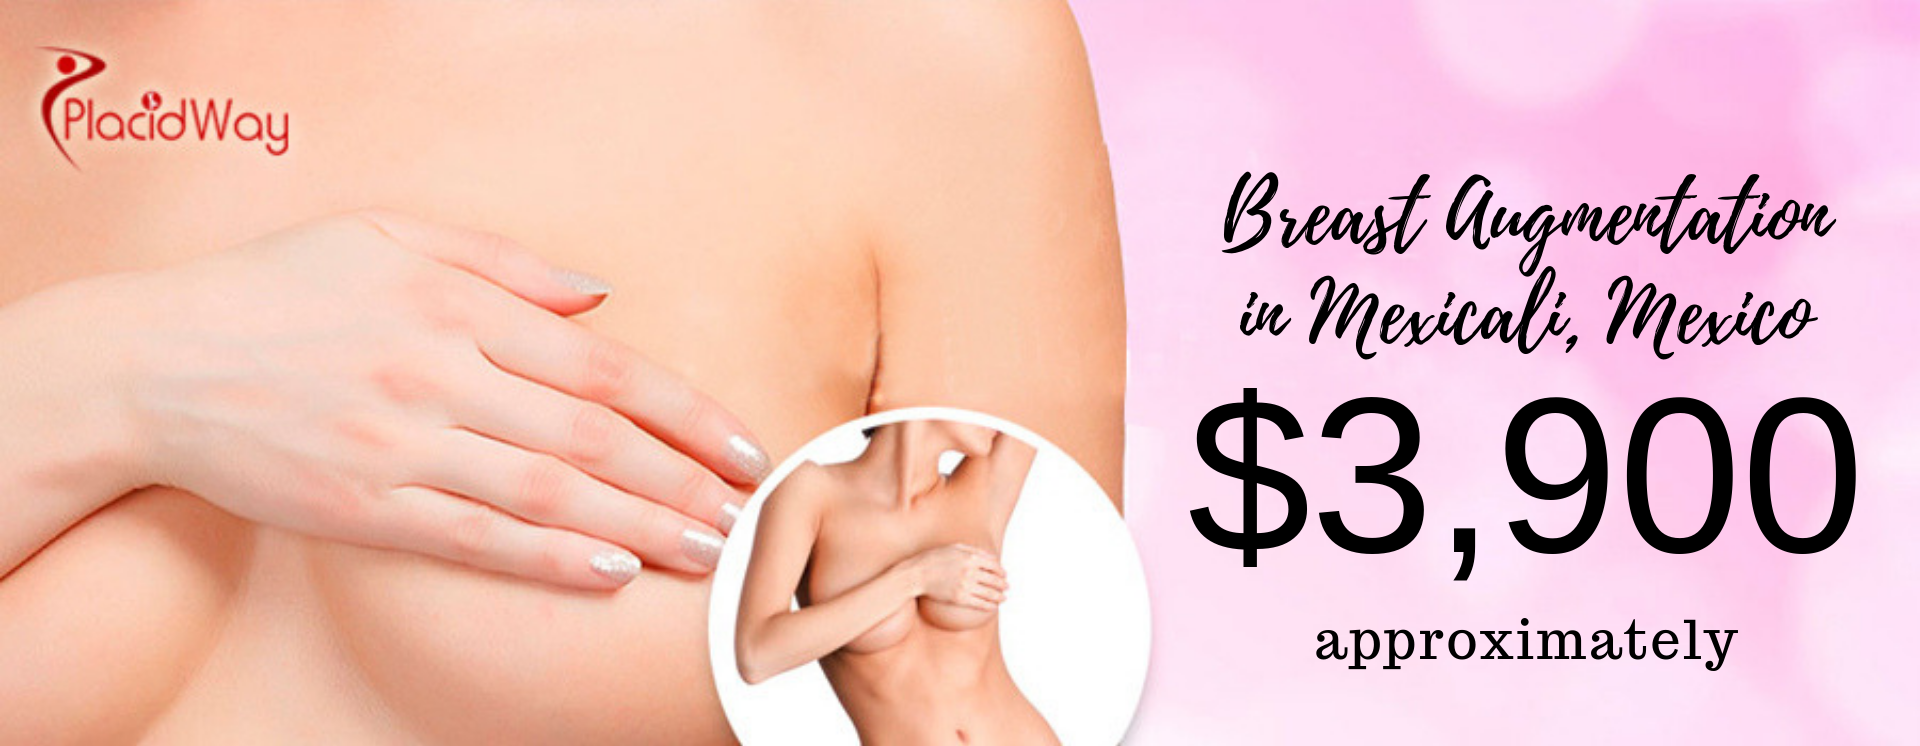 cost of breast augmentation treatment in Mexicali